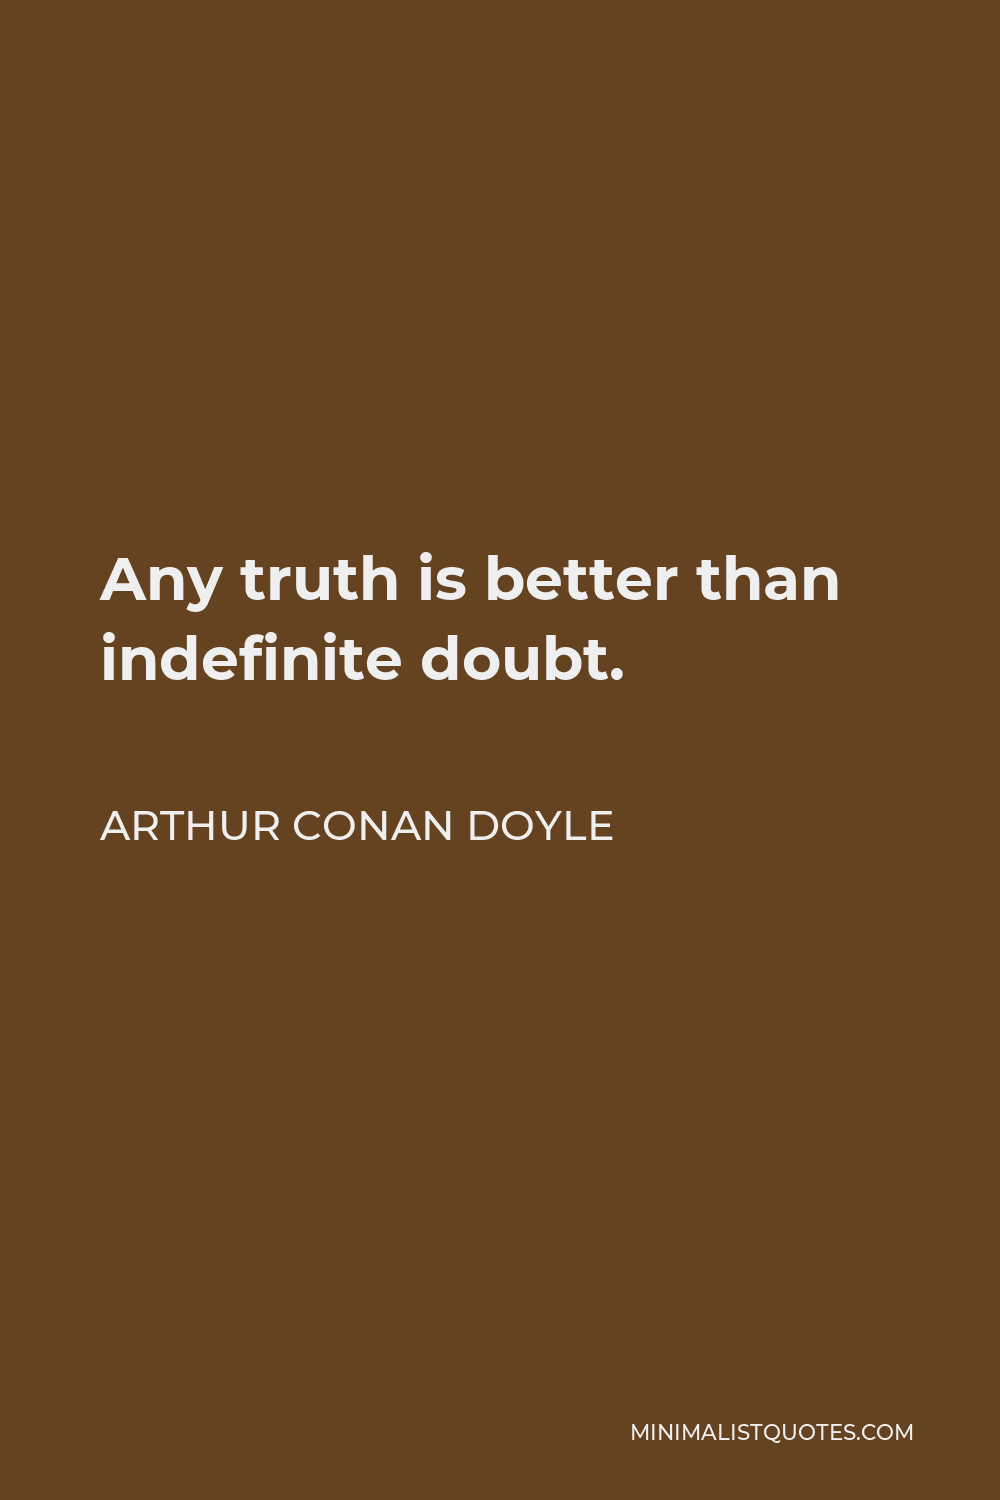 Arthur Conan Doyle Quote - Any truth is better than indefinite doubt.